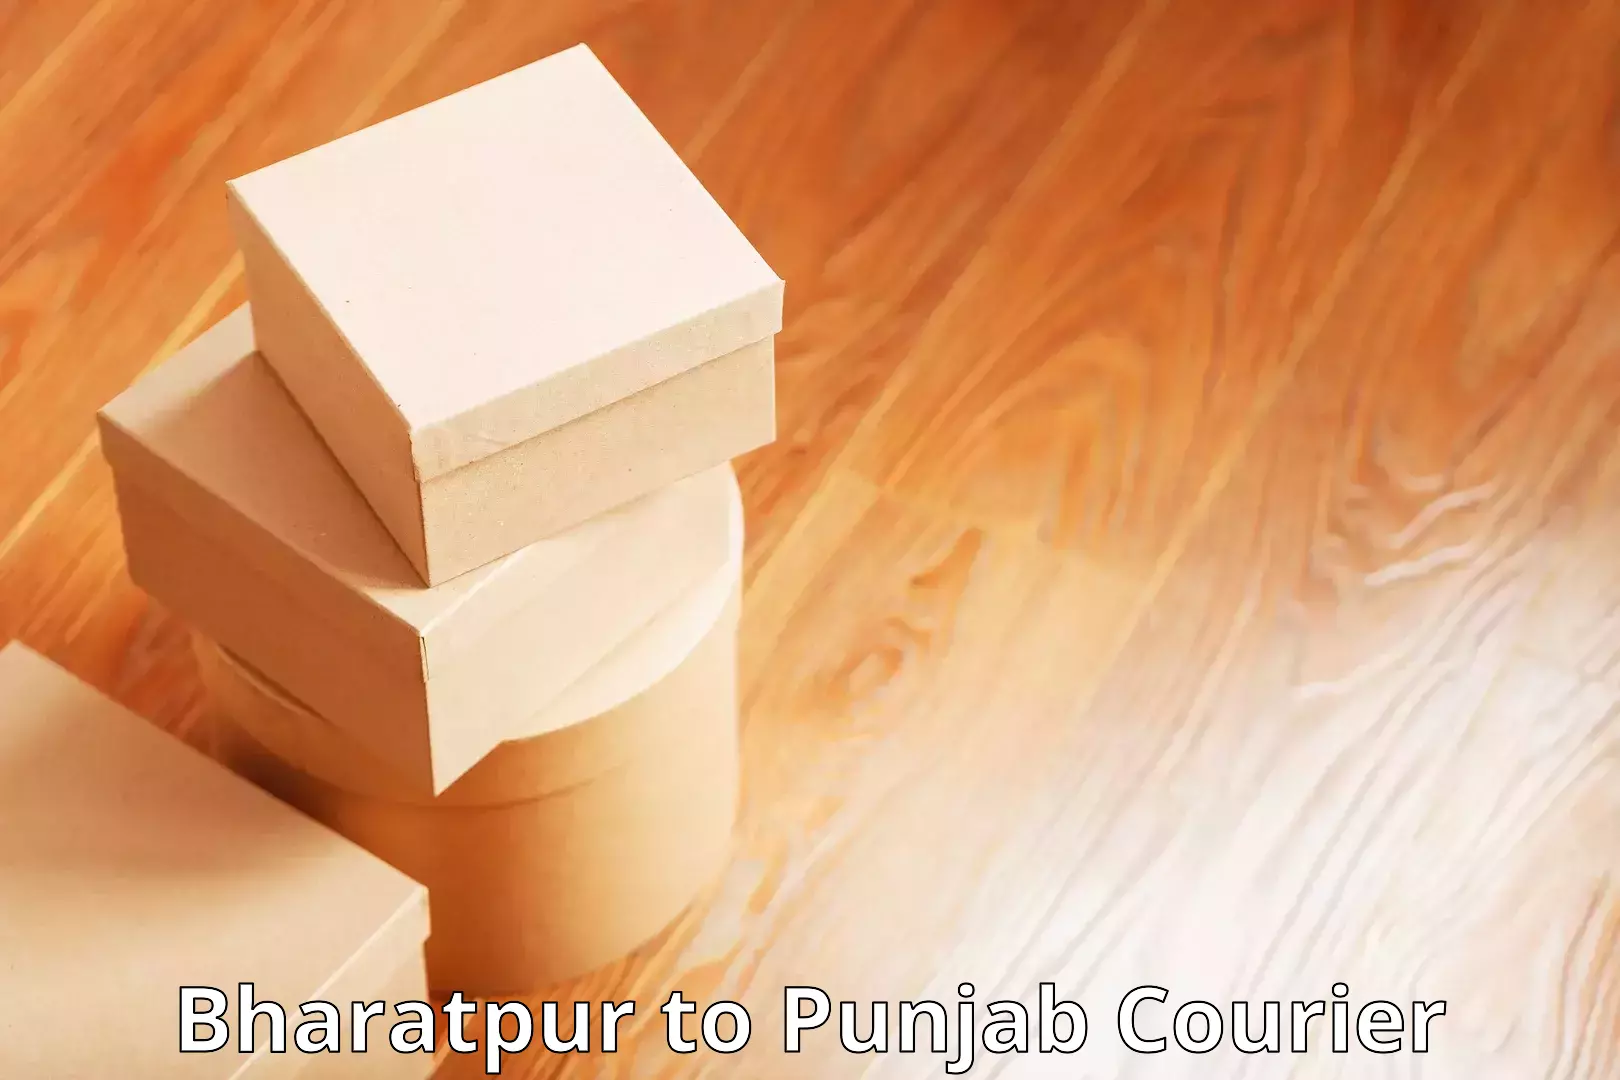 Nationwide parcel services Bharatpur to Ludhiana